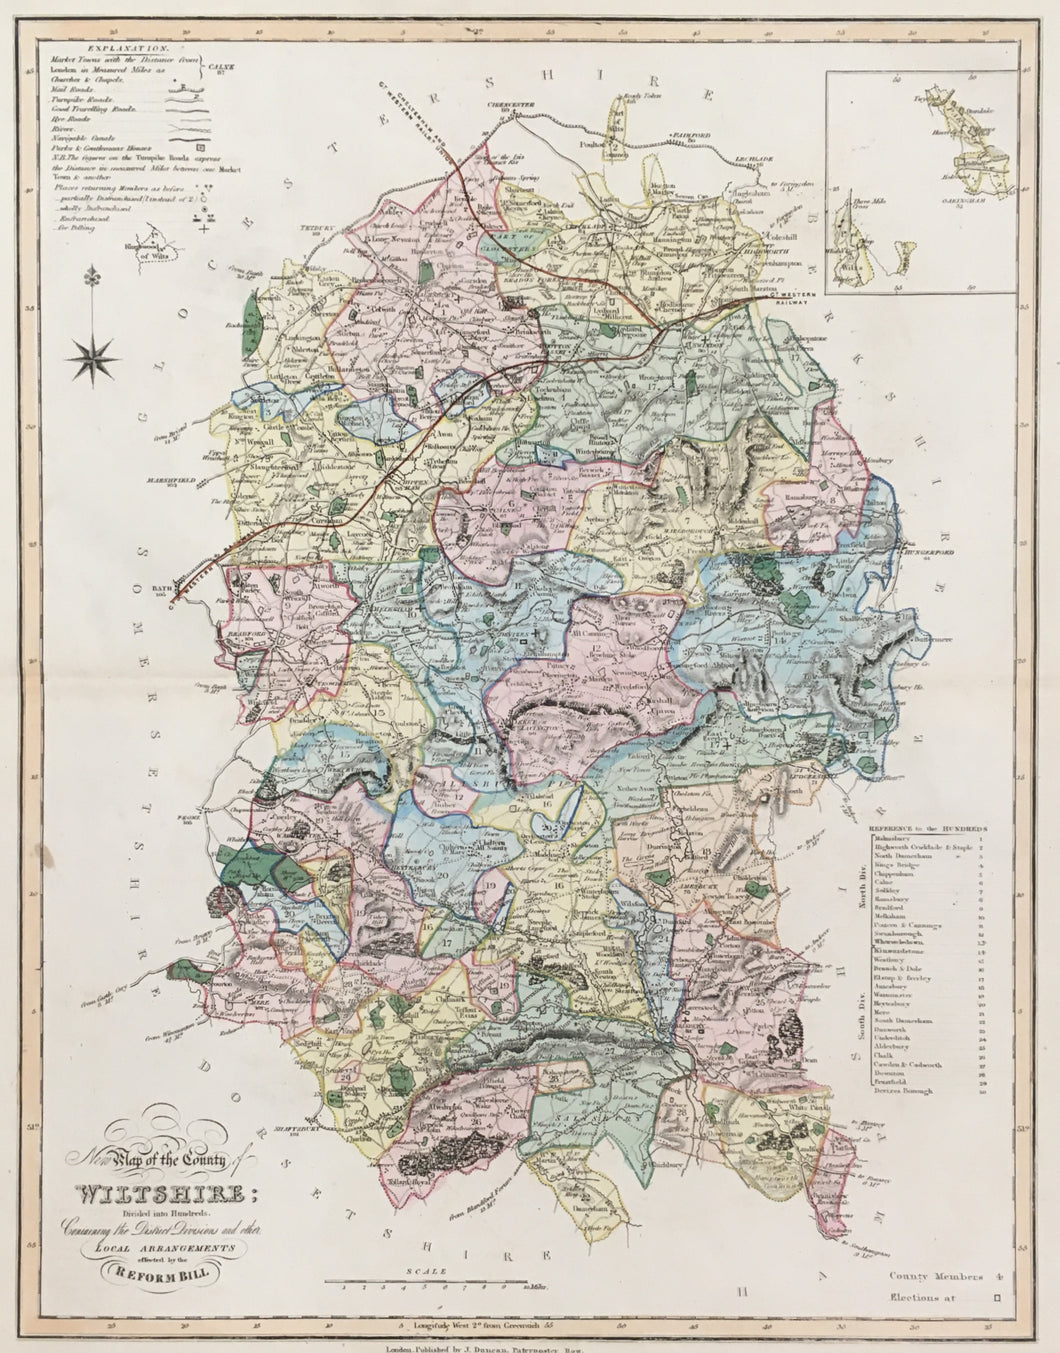 Ebden, William “New Map of the County of Wiltshire.”